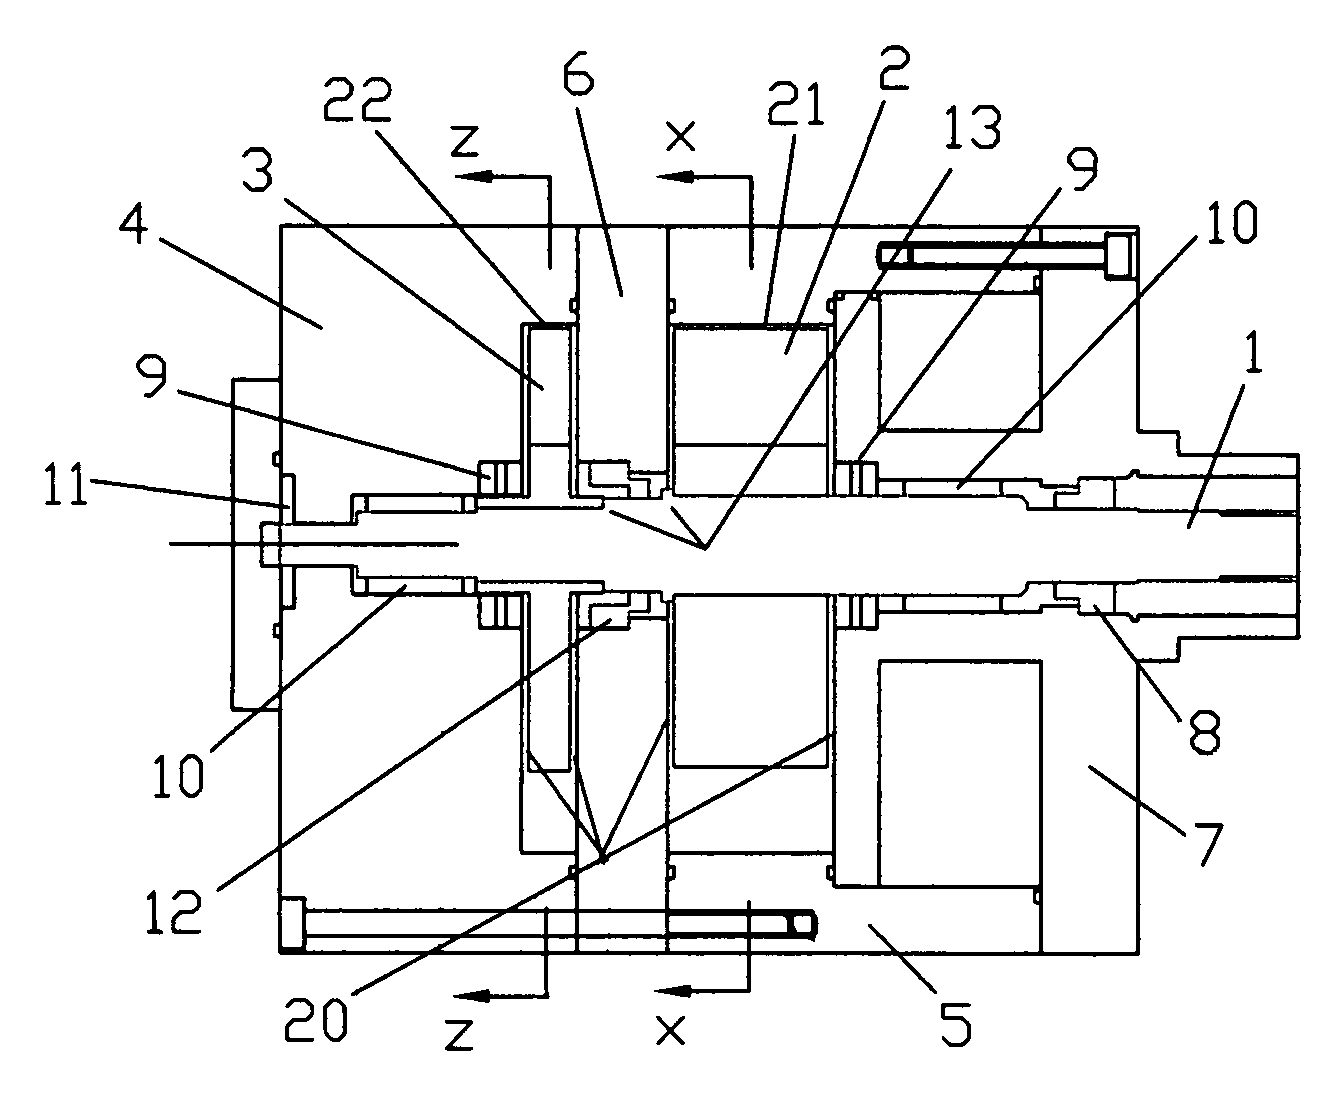 Compressor/expander of the rotating vane type